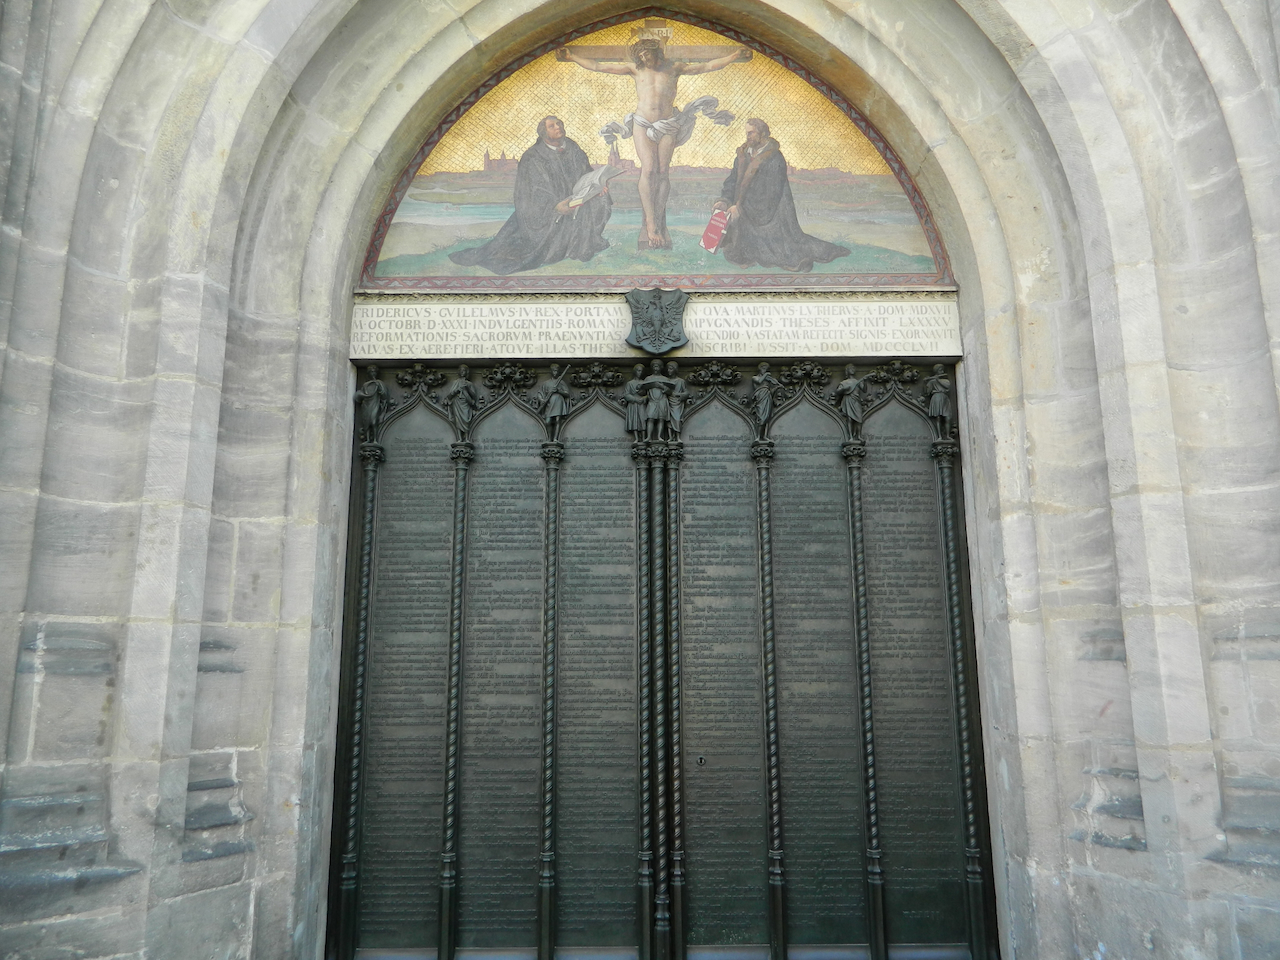 The bronze 95 Theses doors of the Wittenberg Castle Church today.